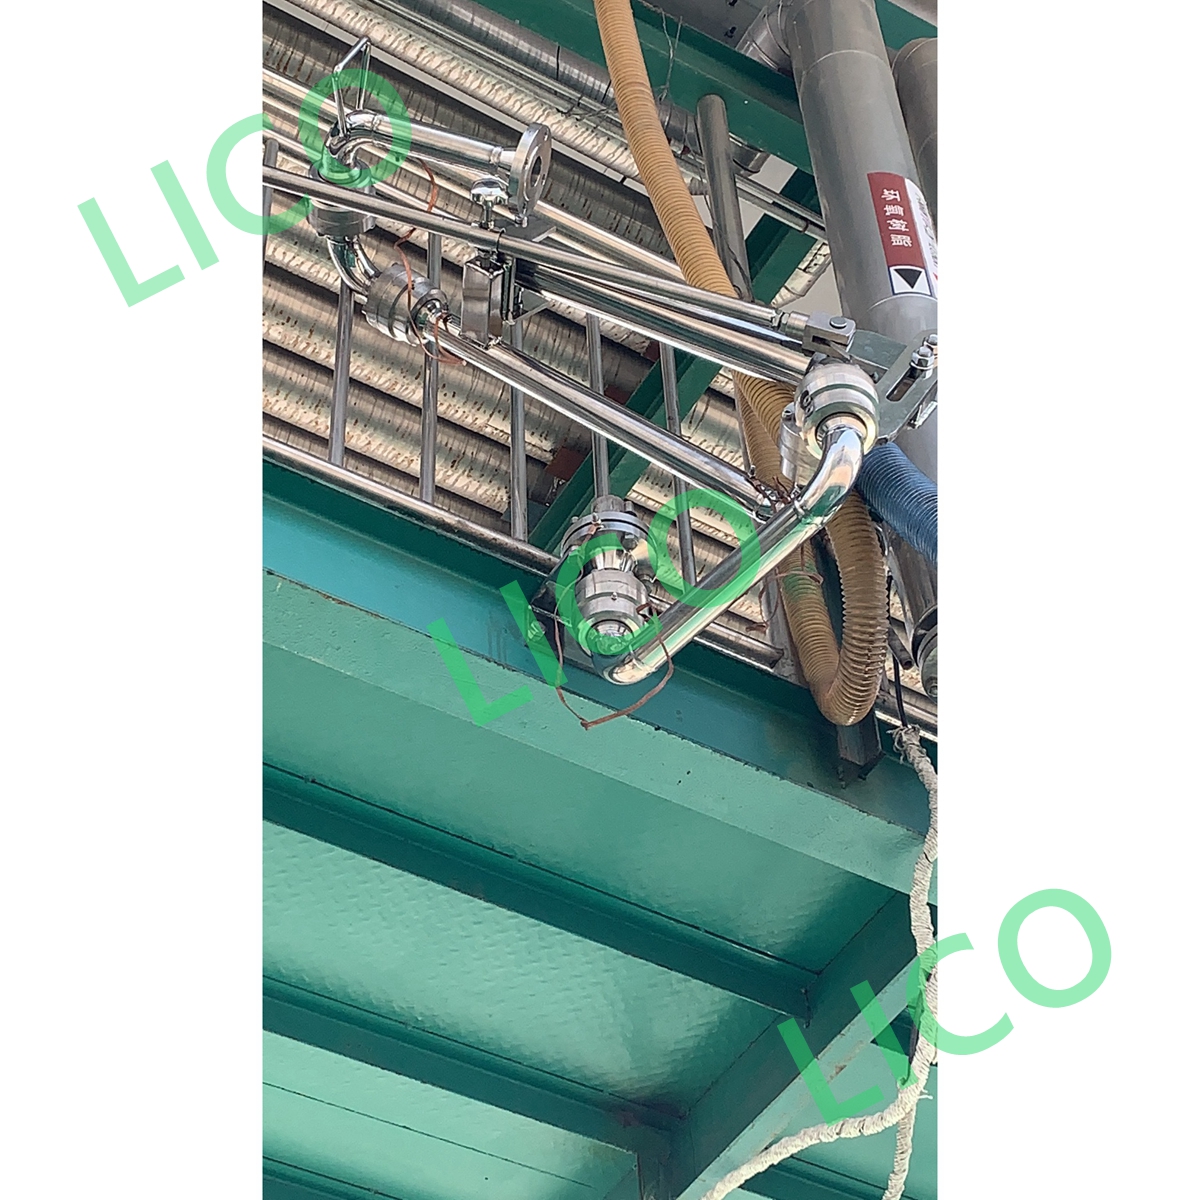 DIESEL With Liquid Level Alarm Top Loading Arm for Chemical Industry